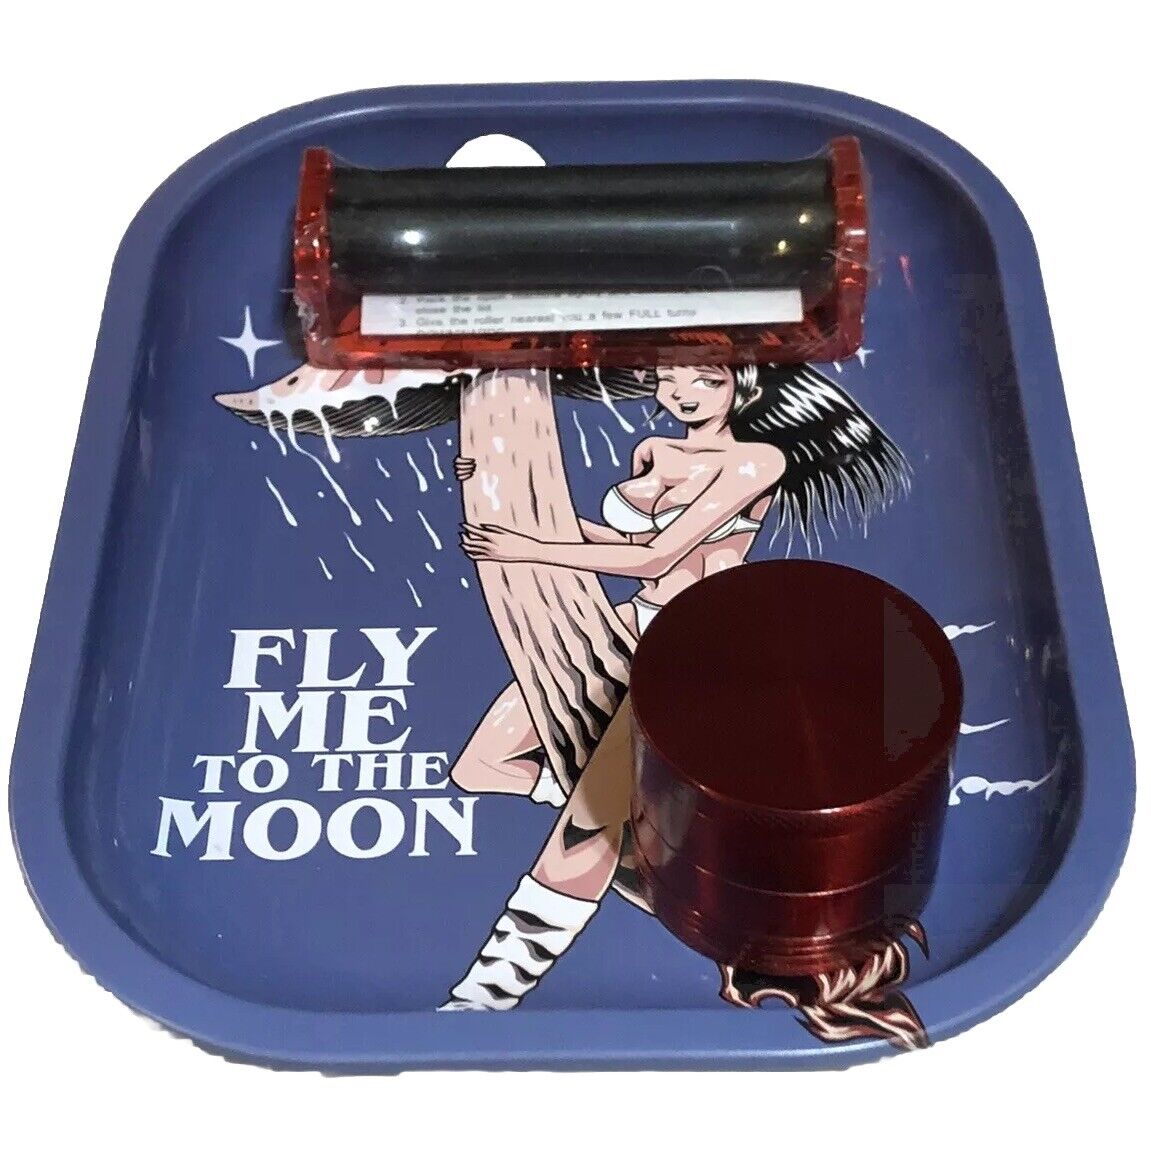 Metal Rolling Tray - Fly Me To The Moon Tobacco grinder, with cigarette roller￼